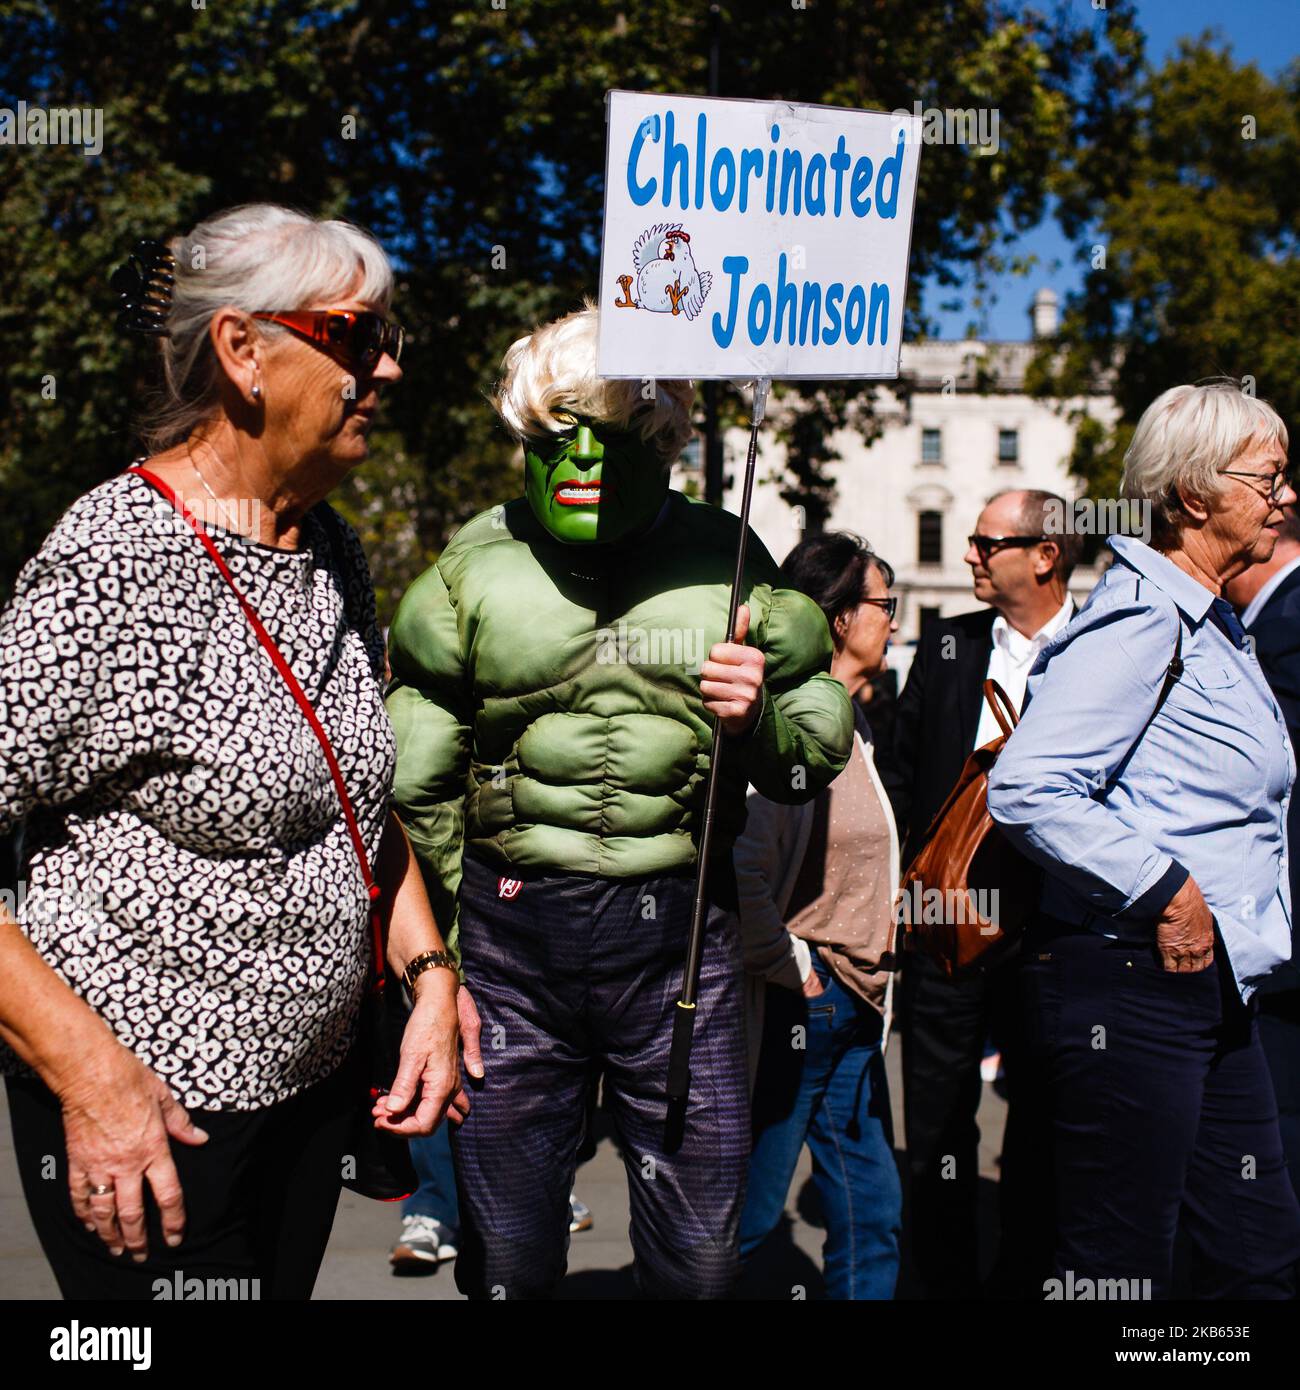 A protester wears an Incredible Hulk costume and Boris Johnson wig as activists calling for the reopening of Parliament demonstrate outside the Supreme Court in London, England, on September 17, 2019. Mr Johnson at the weekend likened himself to the superhero character in his approach to Brexit. A panel of 11 judges at the Supreme Court today began hearing arguments in two appeals of rulings over the legality of the current prorogation of Parliament. The prorogation has been ruled unlawful by the Court of Session in Edinburgh, where it was declared that prorogation had been improperly motivate Stock Photo